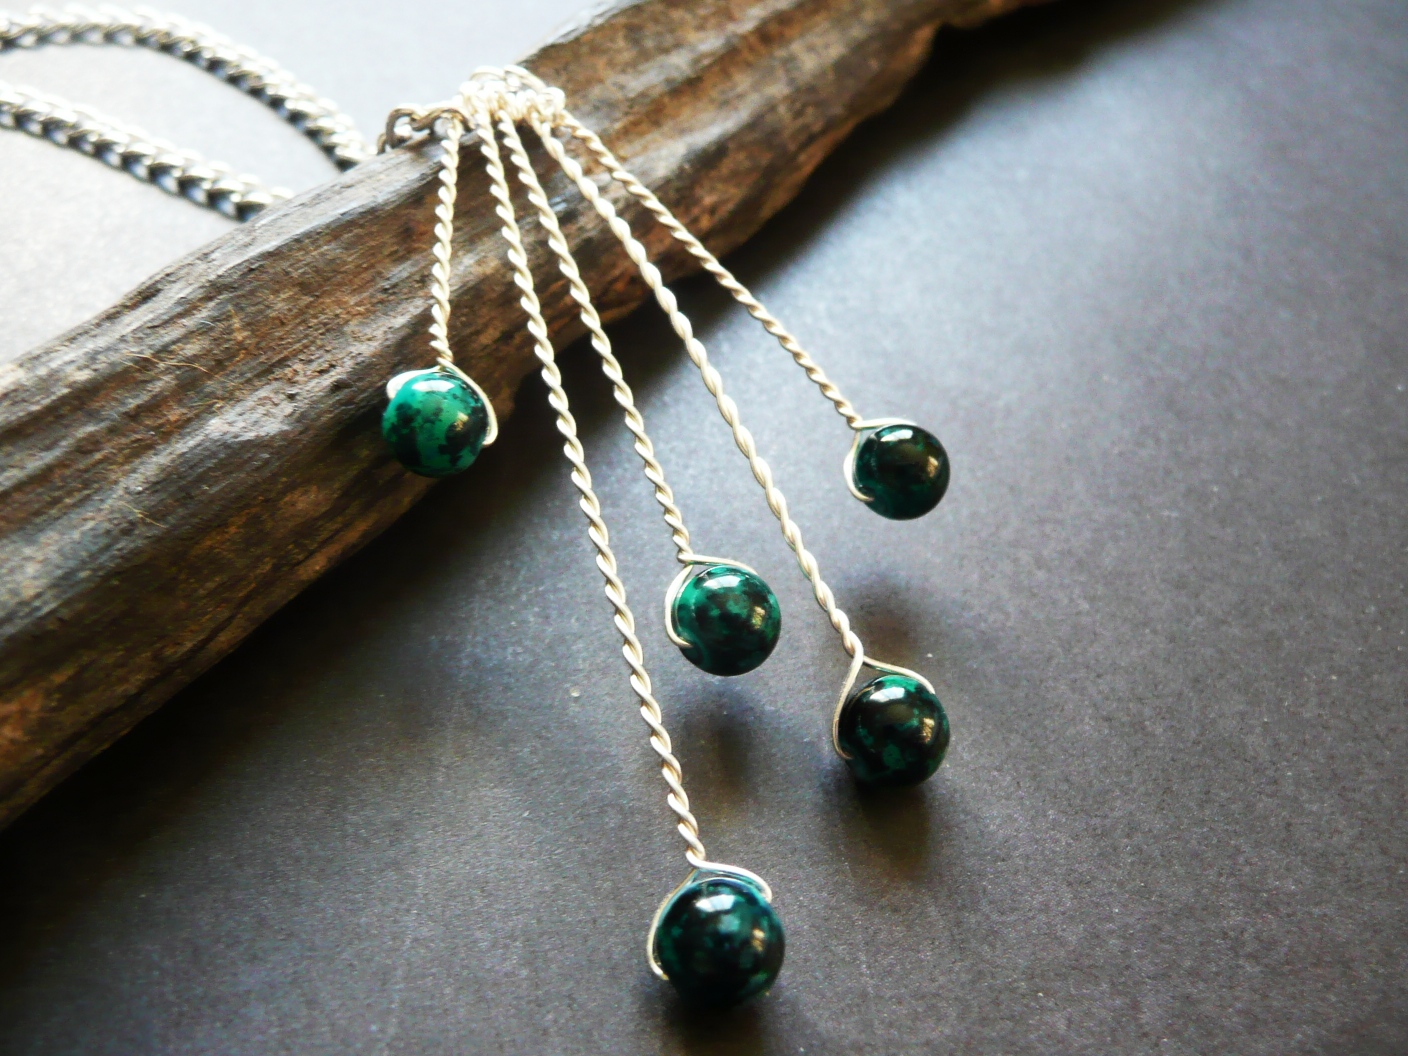 dewdrops-green-necklace-stick